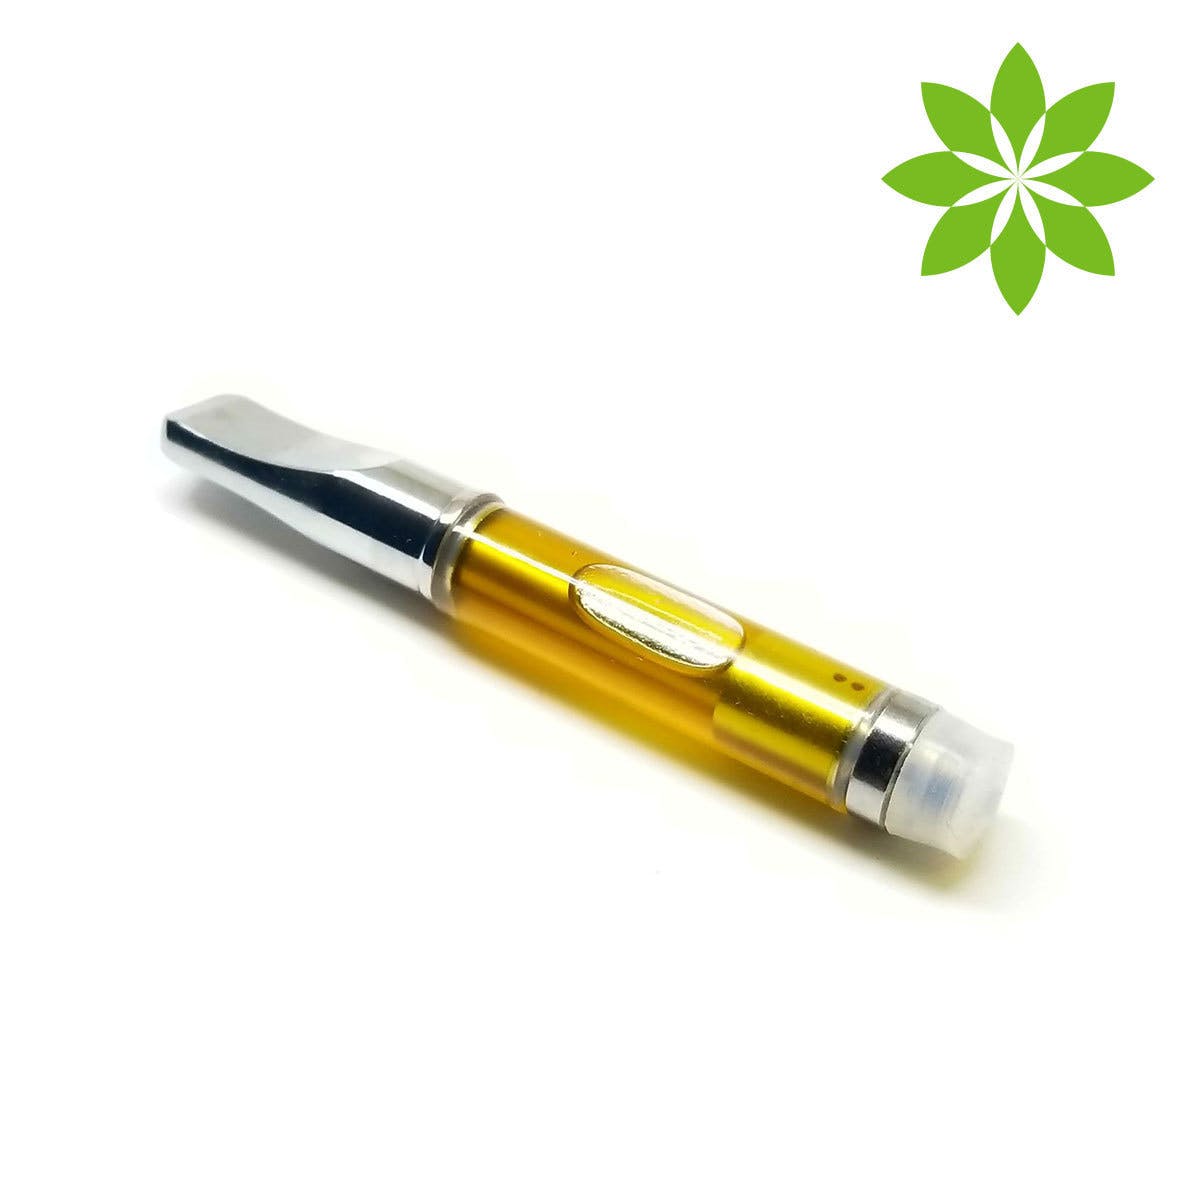 concentrate-o-pen-oil-cartridge-s-2c-h-2c-i-500mg-or-1000mg